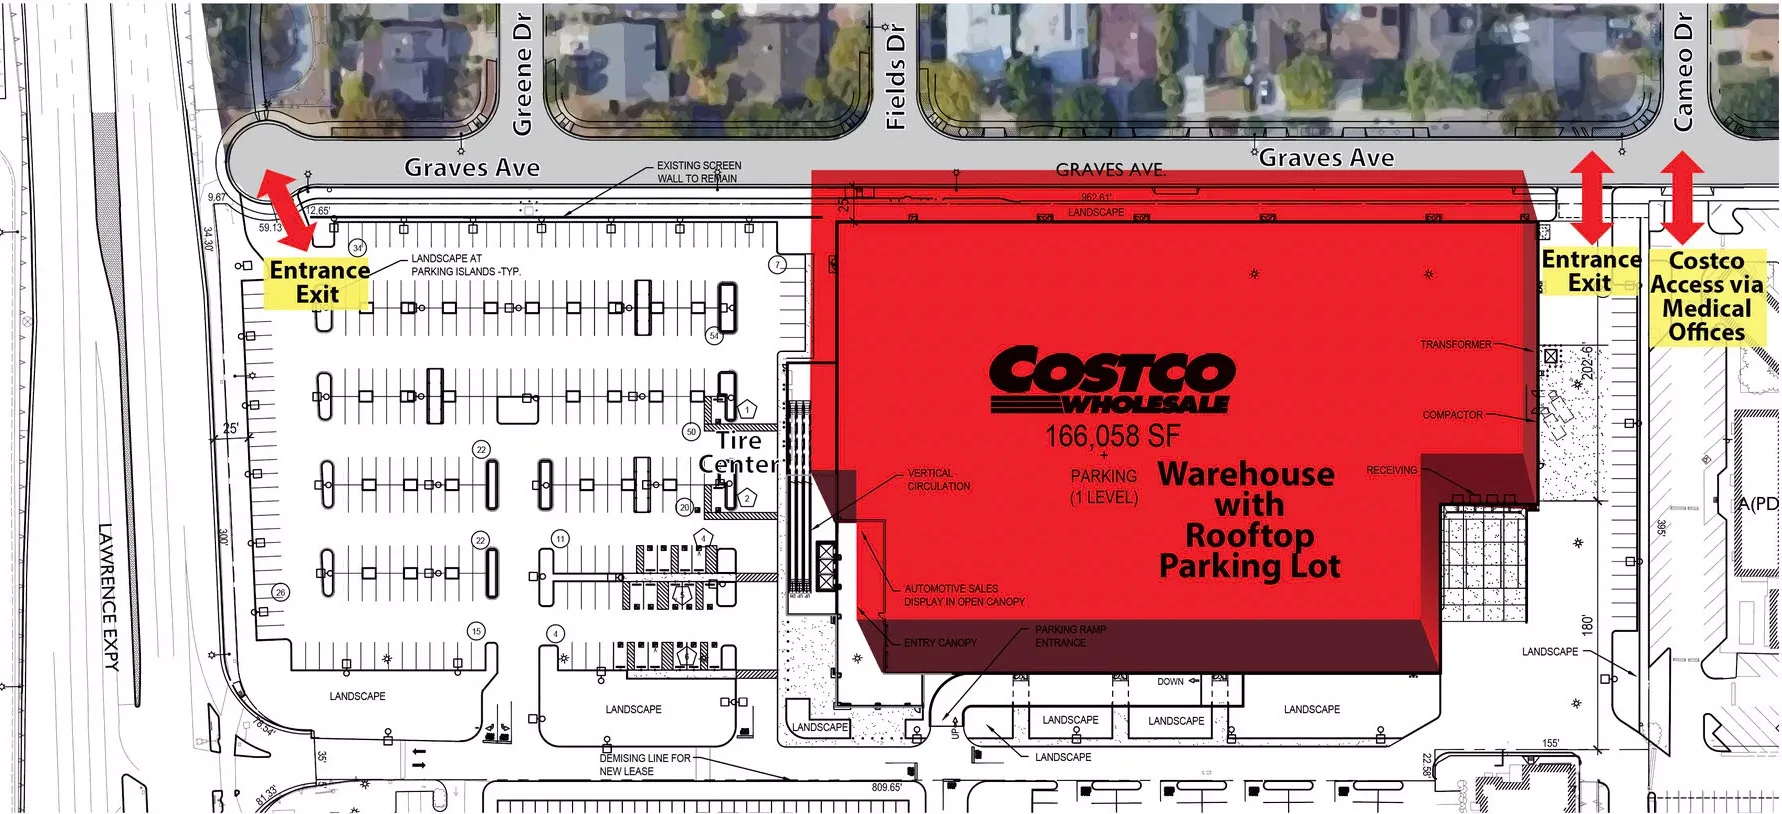 About the Costco Project — Save West Valley!